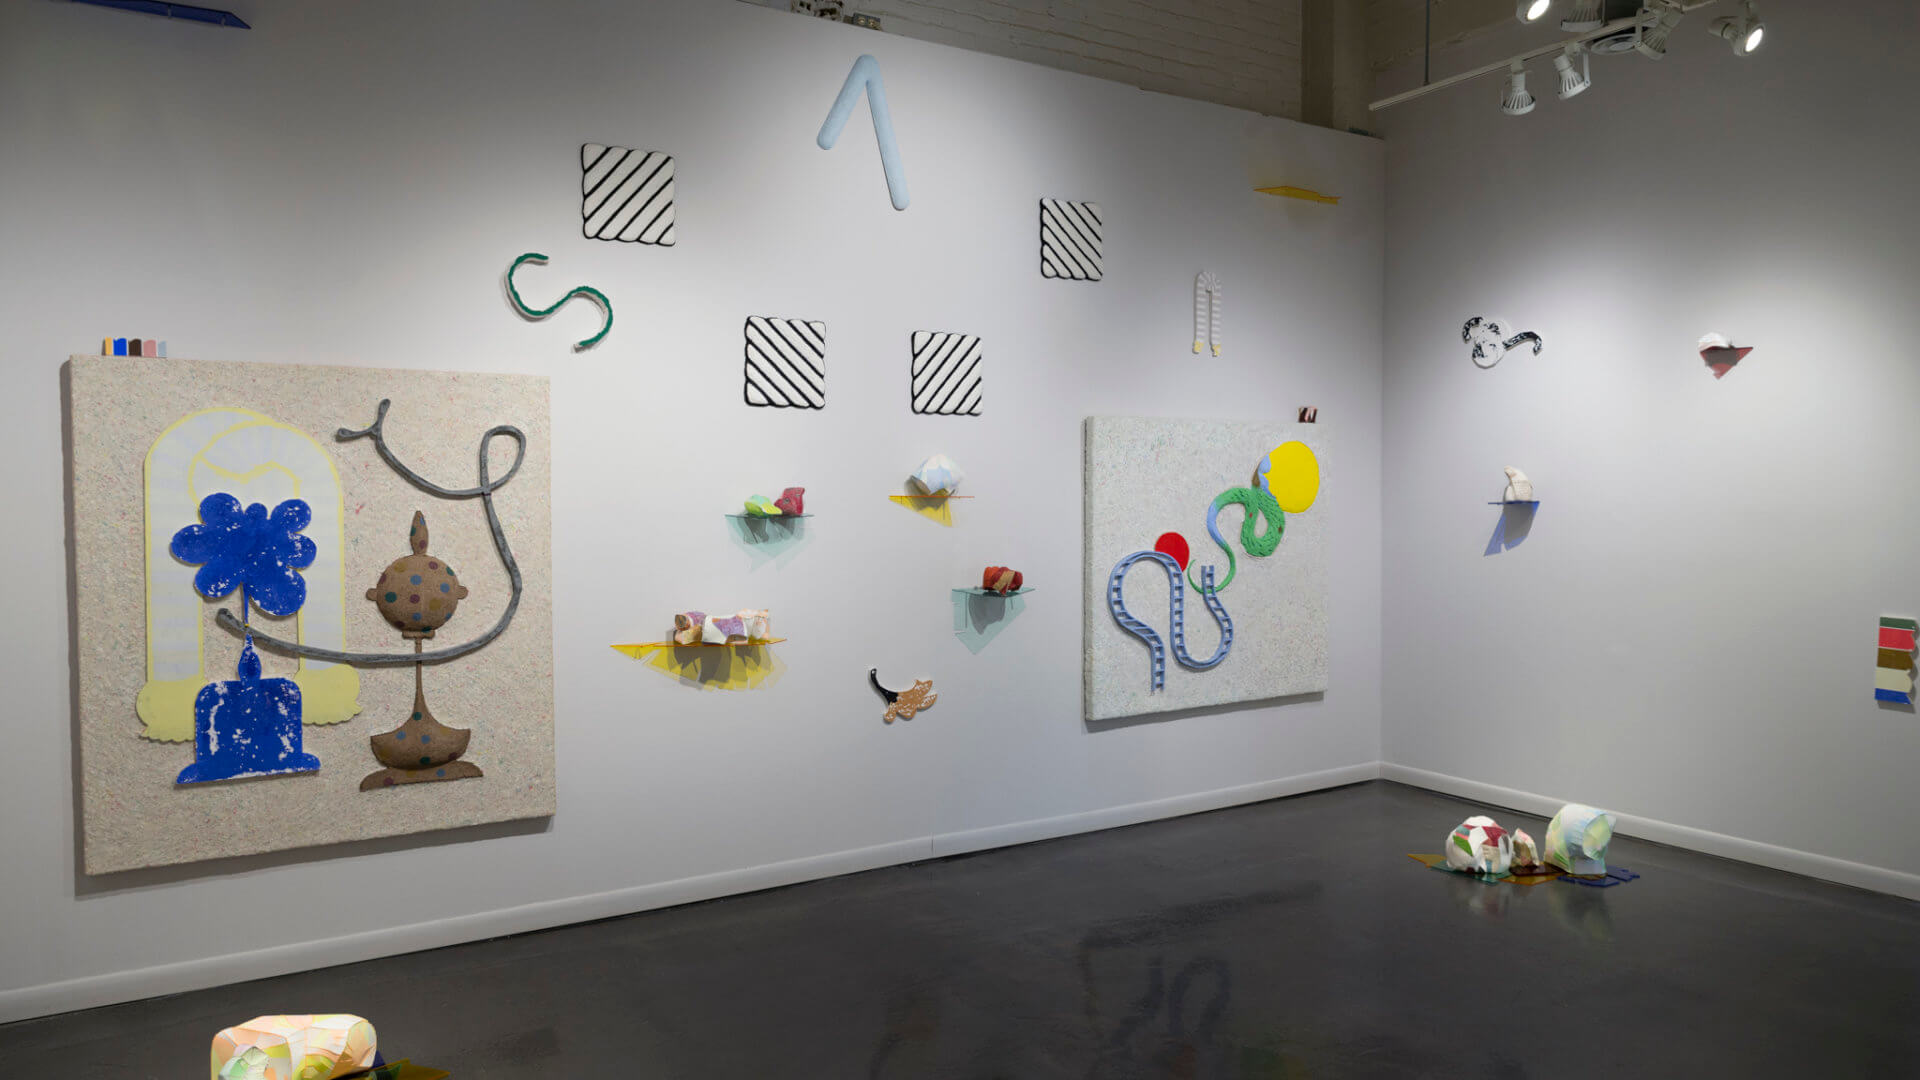 Installation view of Playground Chitchat. Image credit: Sarah Fuller.